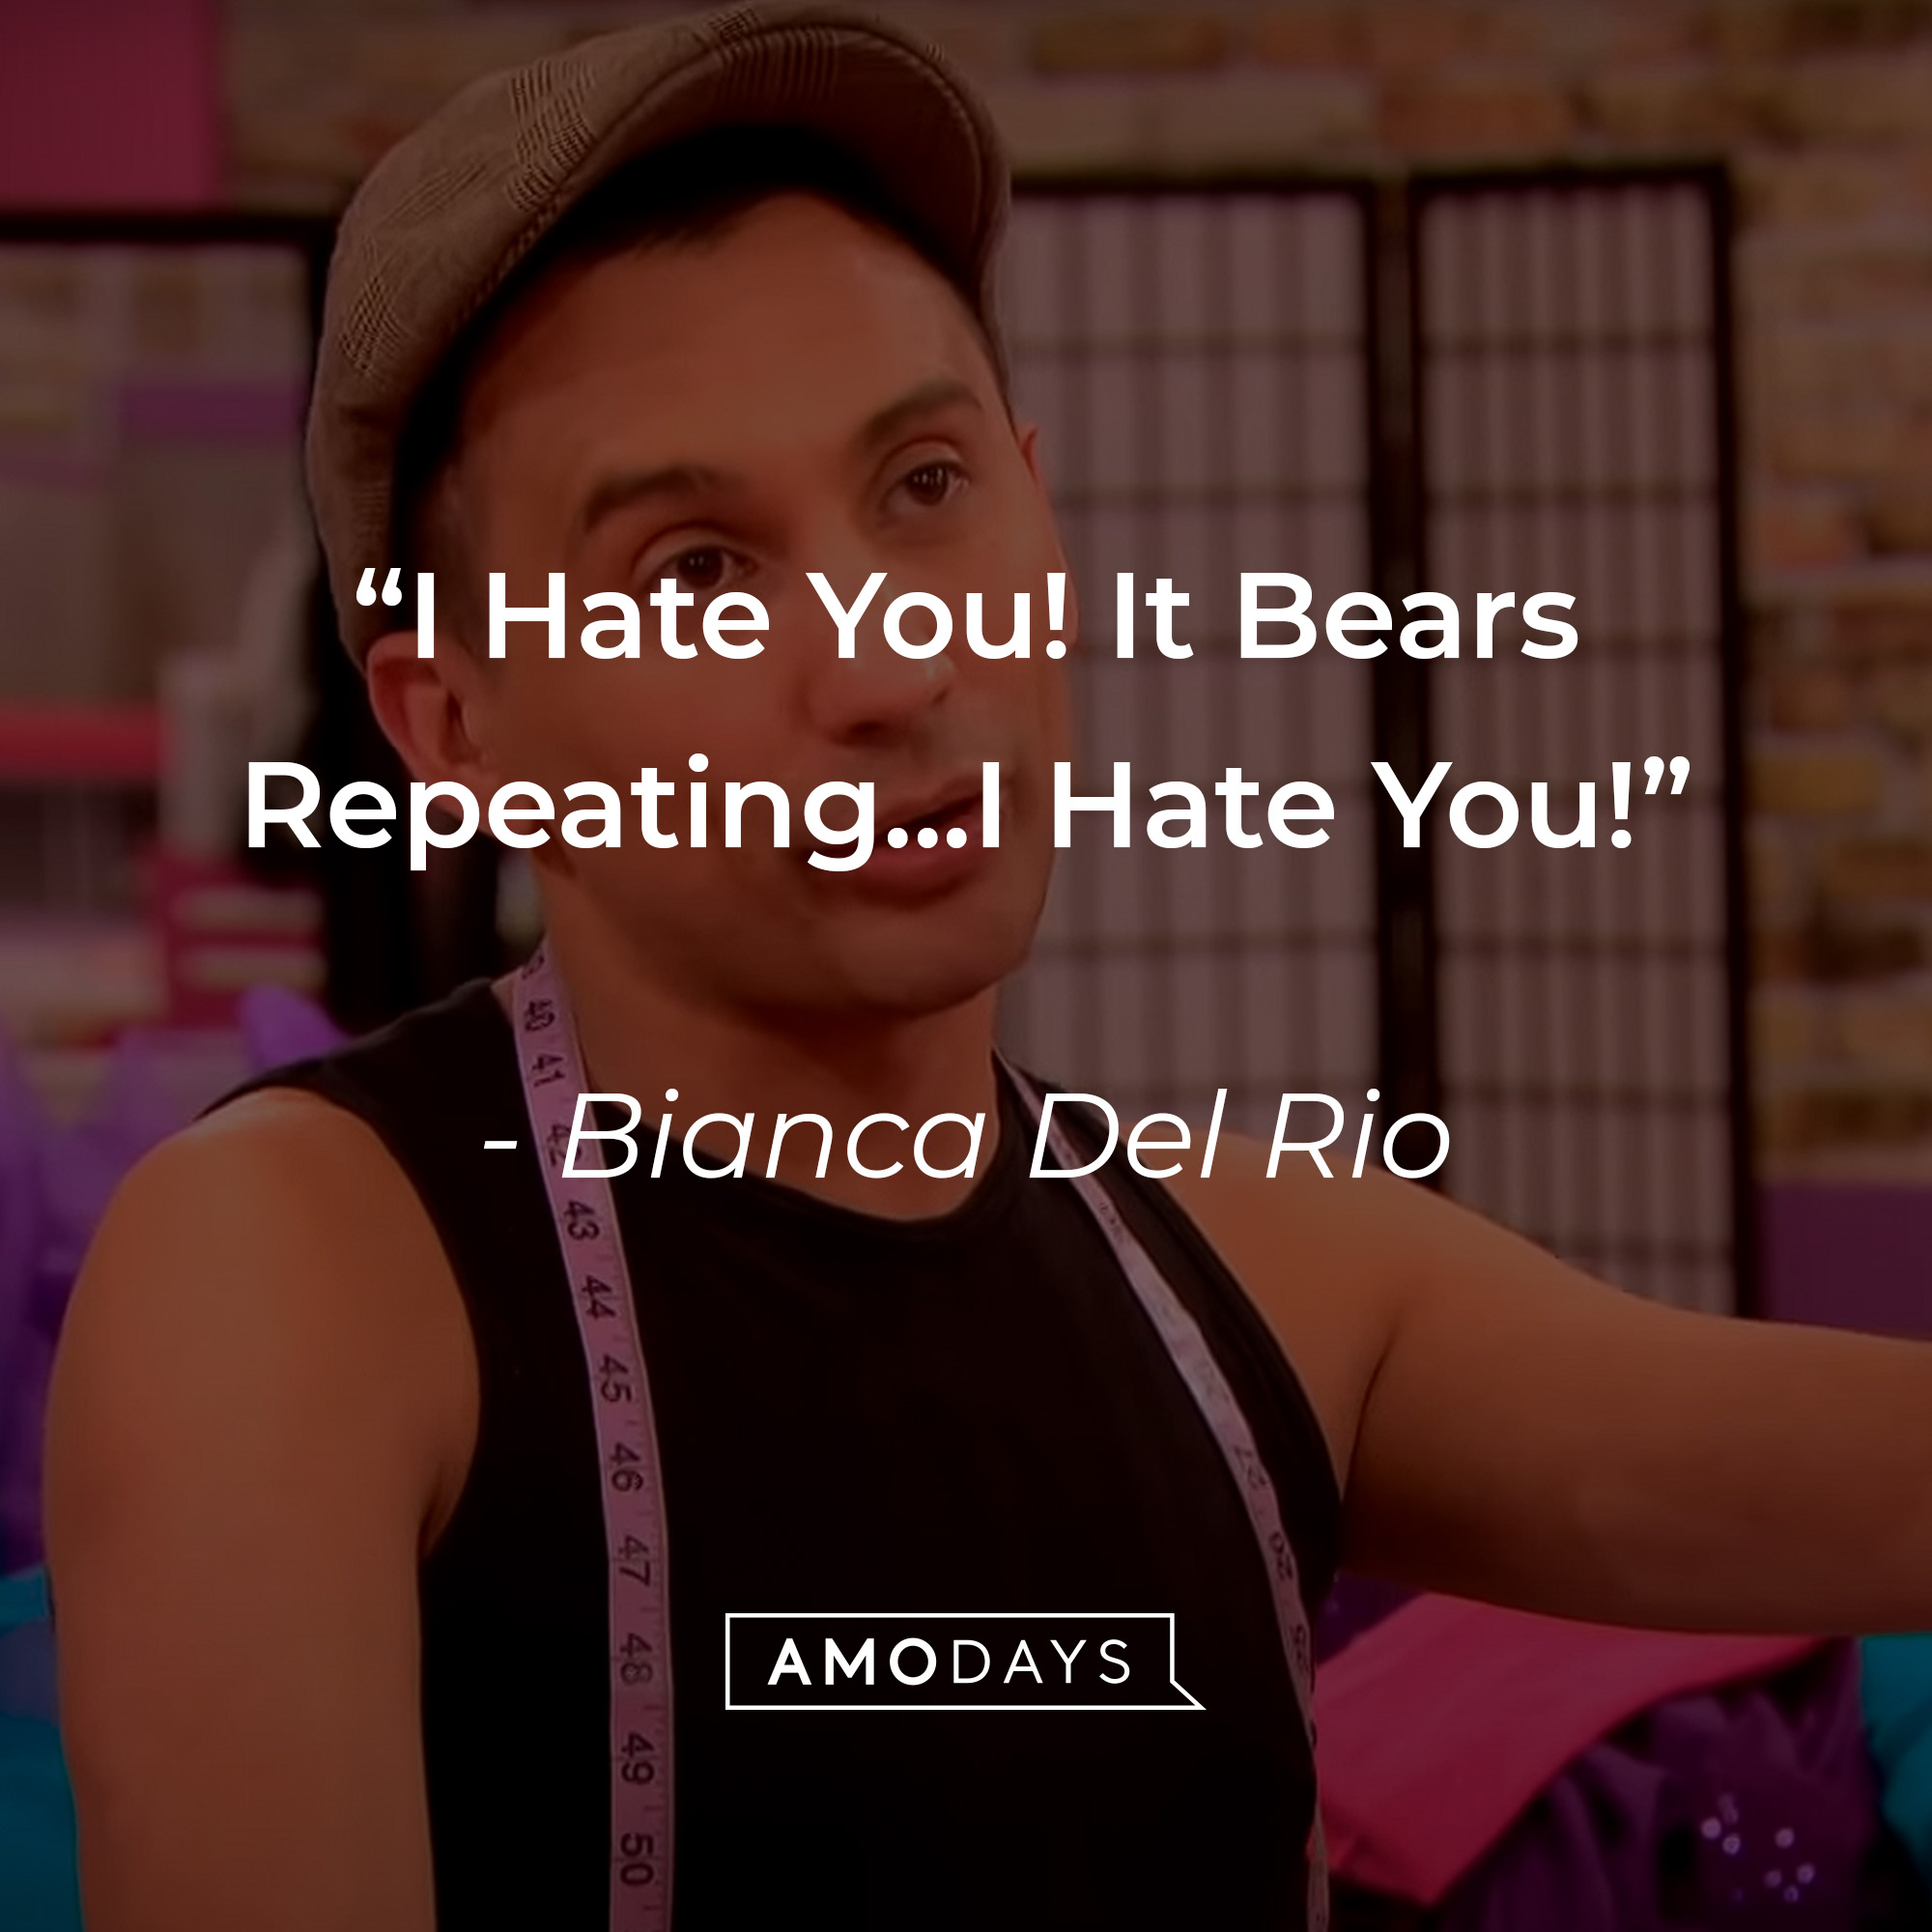 Bianca Del Rio's quote: “I Hate You! It Bears Repeating...I Hate You!” | Source: youtube.com/rupaulsdragrace